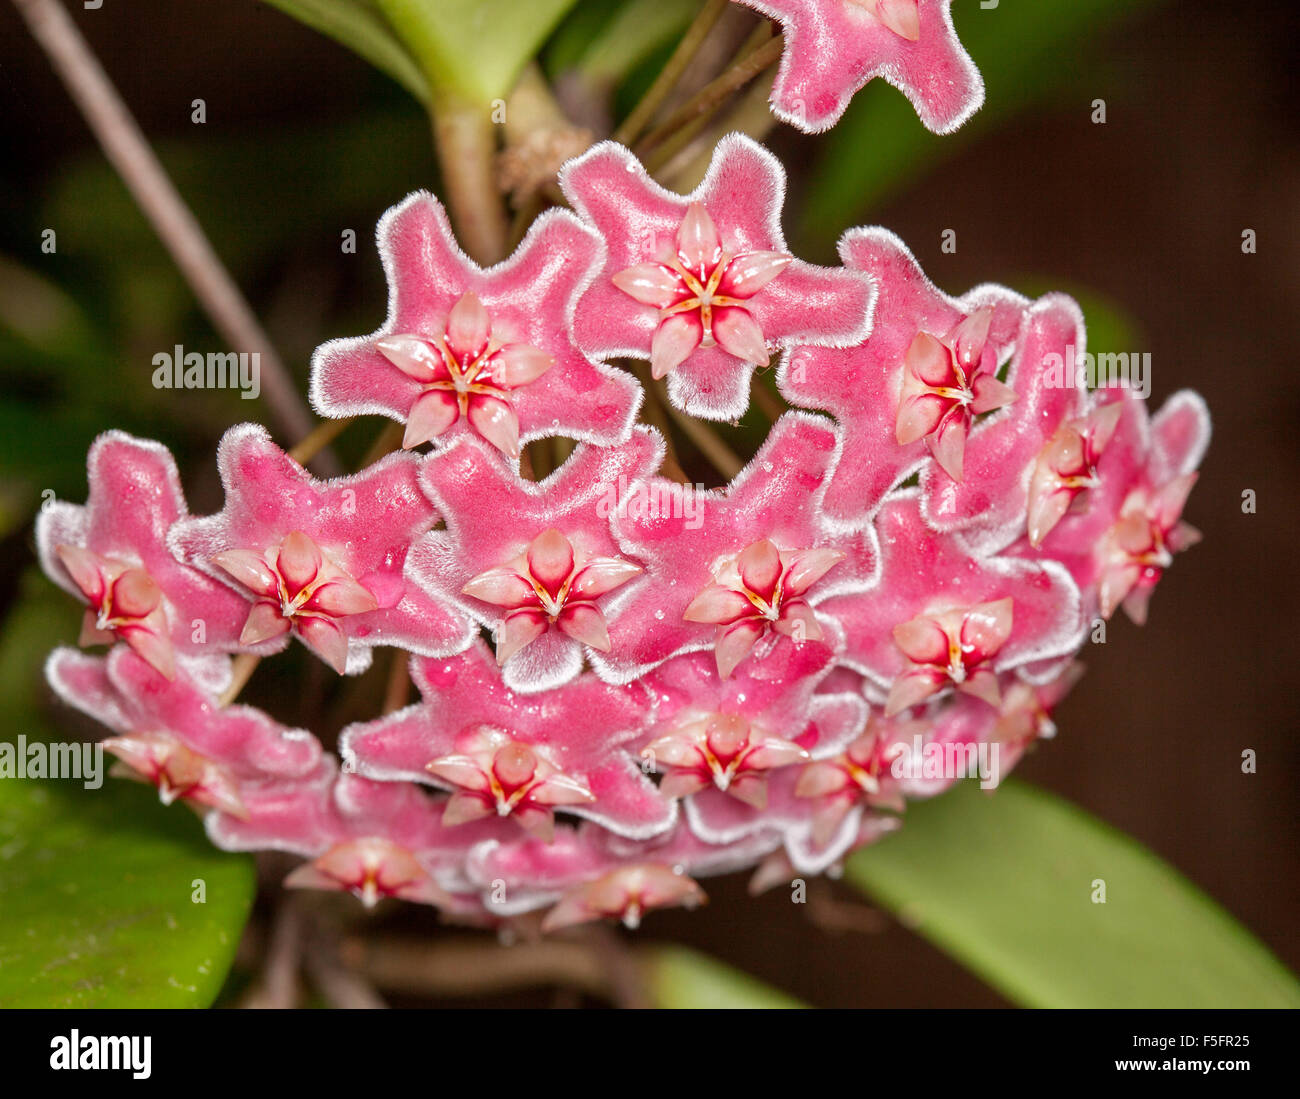 Large cluster of spectacular deep pink / red perfumed flowers edged with white of Hoya 'Royal Hawaiian', climbing plant Stock Photo